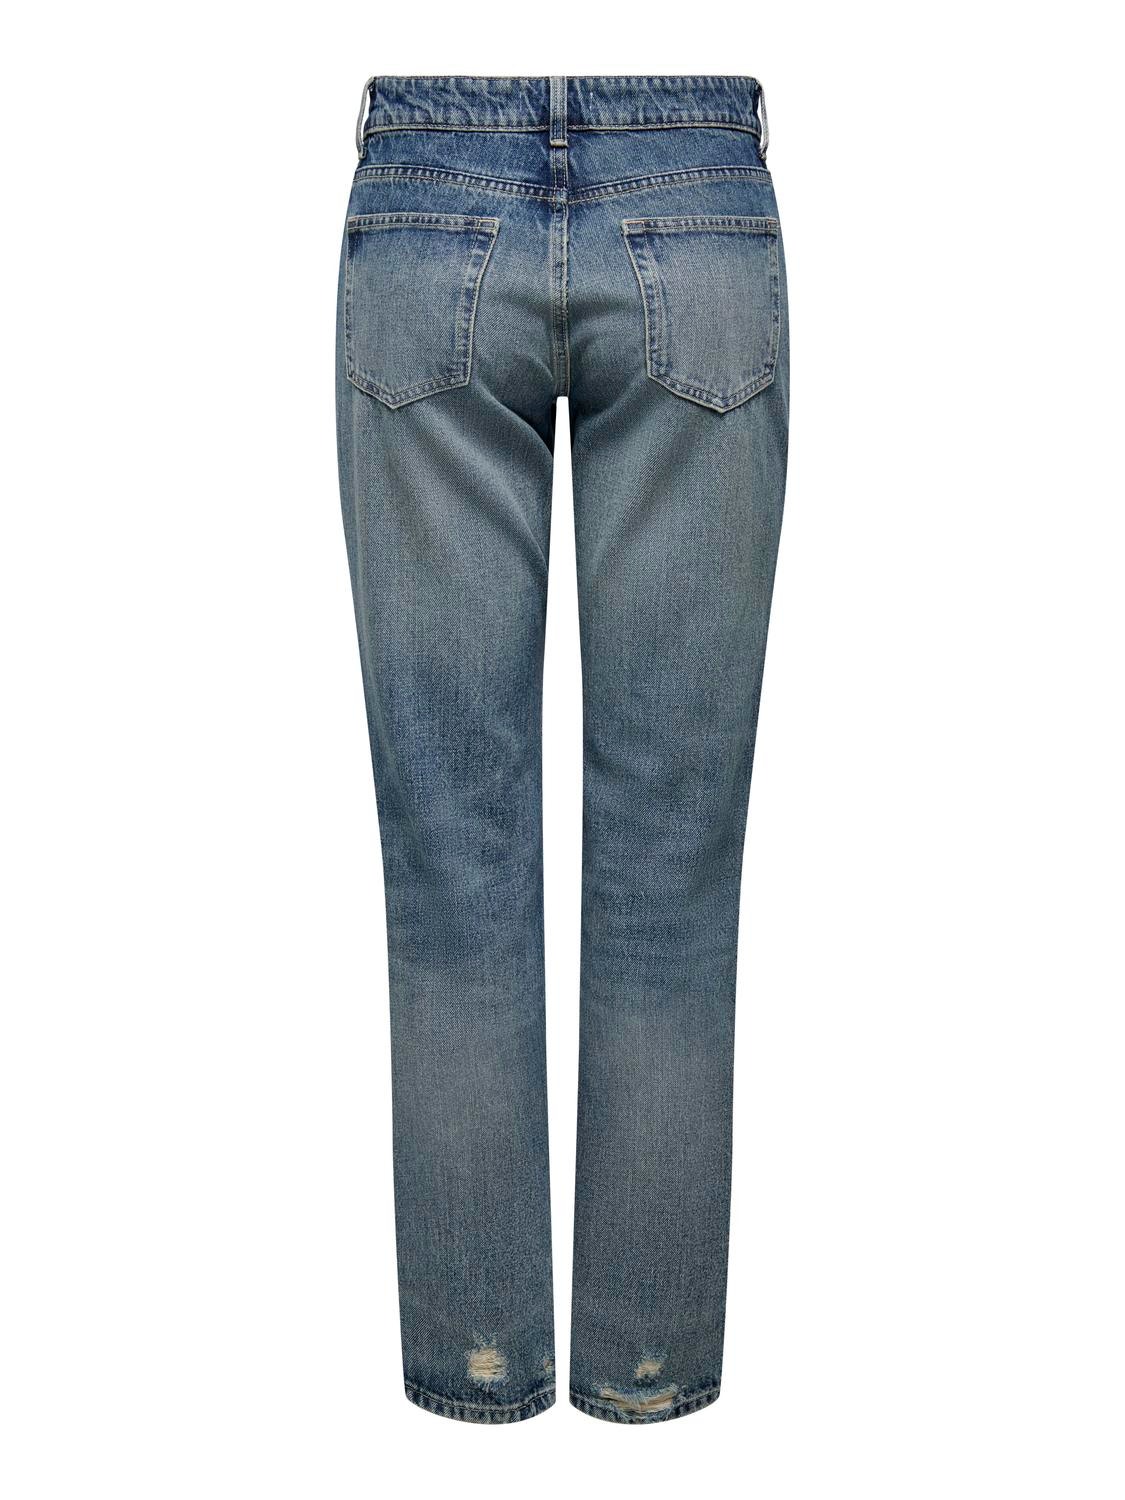 ONLY Jeans Straight Fit Taille moyenne -Medium Blue Denim - 15310924